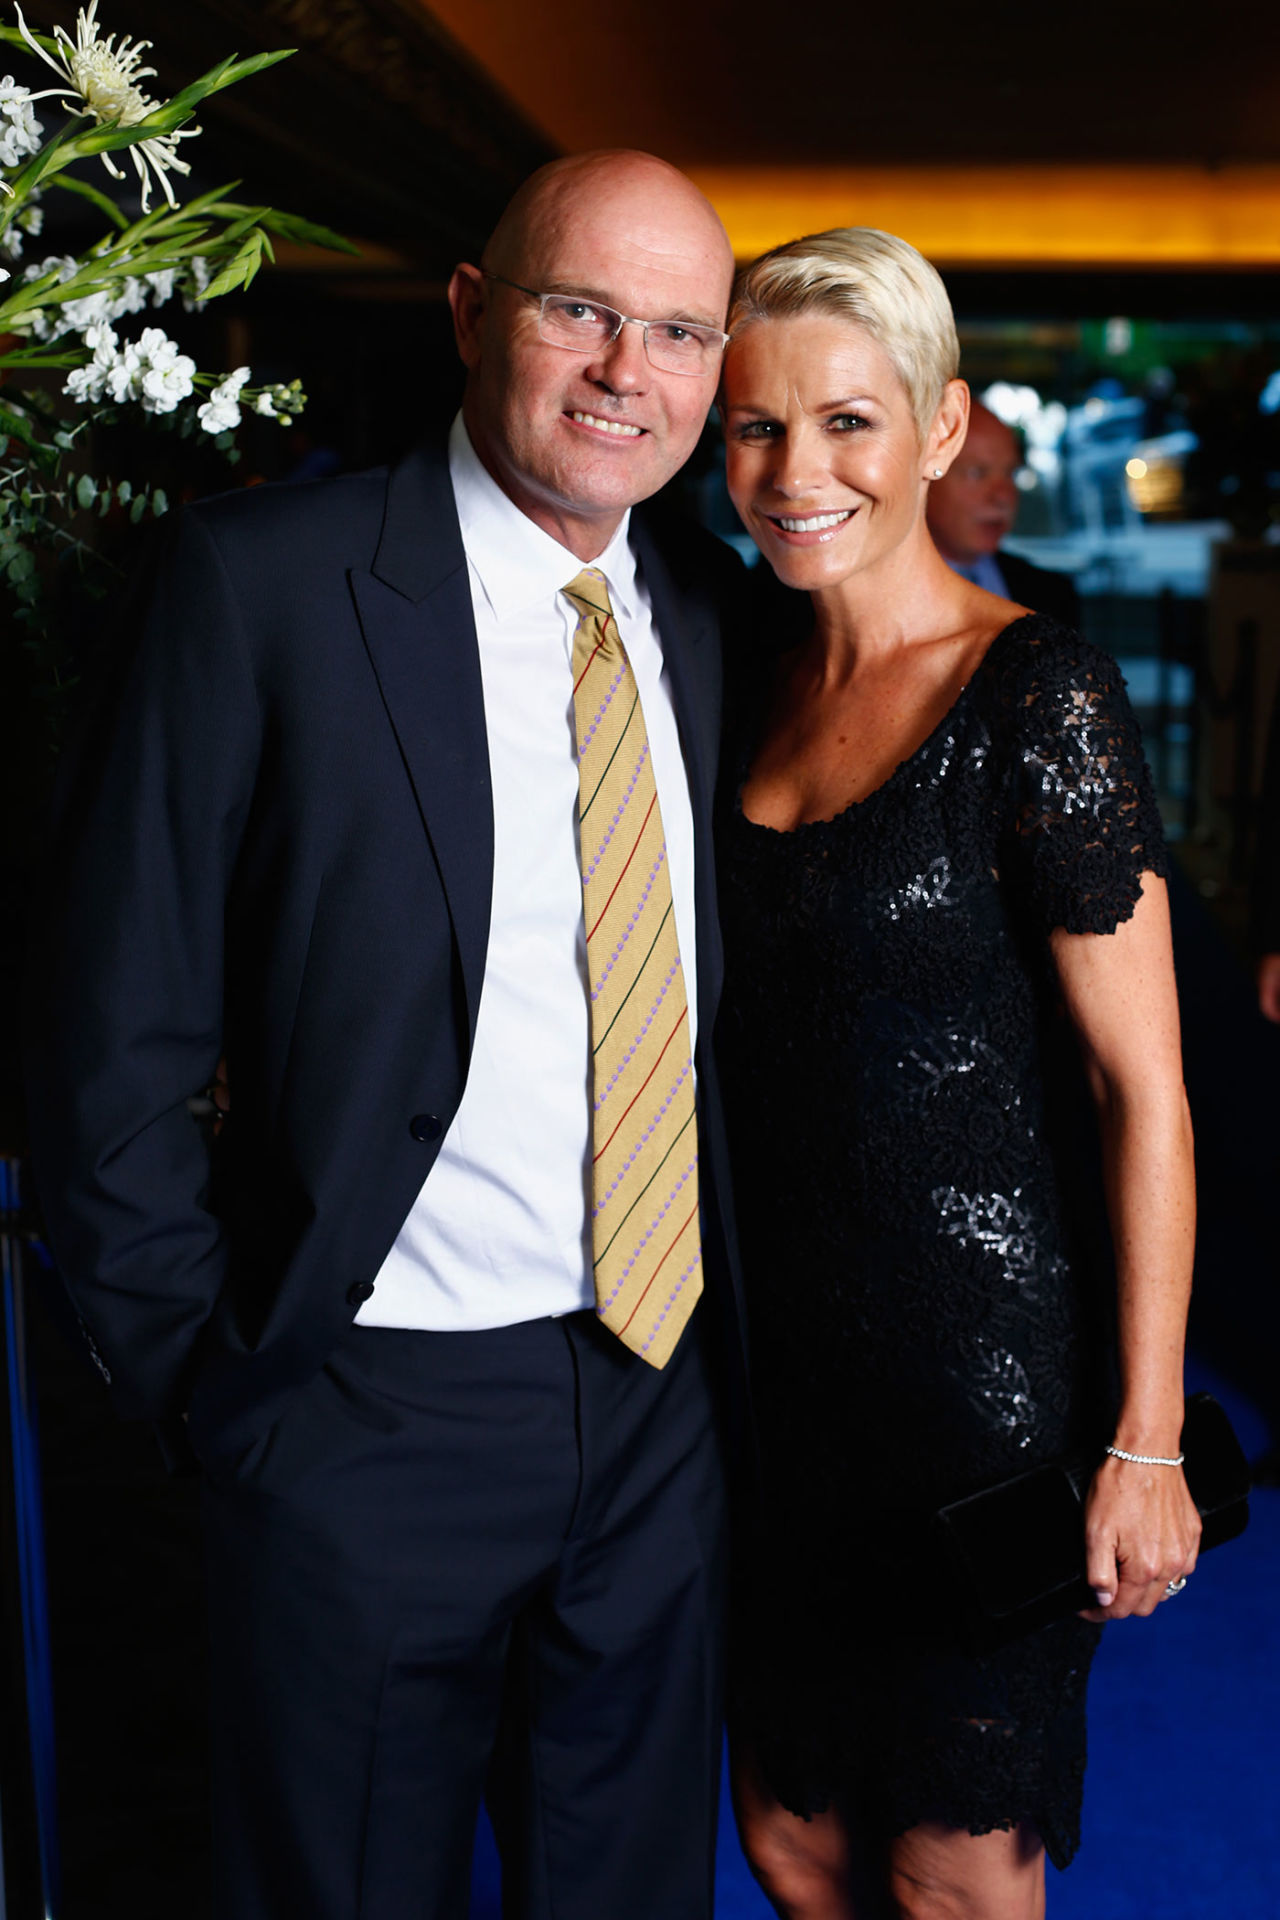 Martin Crowe and his wife, Lorraine Downes at the New Zealand Cricket awards, the Langham Hotel, Auckland, April 1, 2015